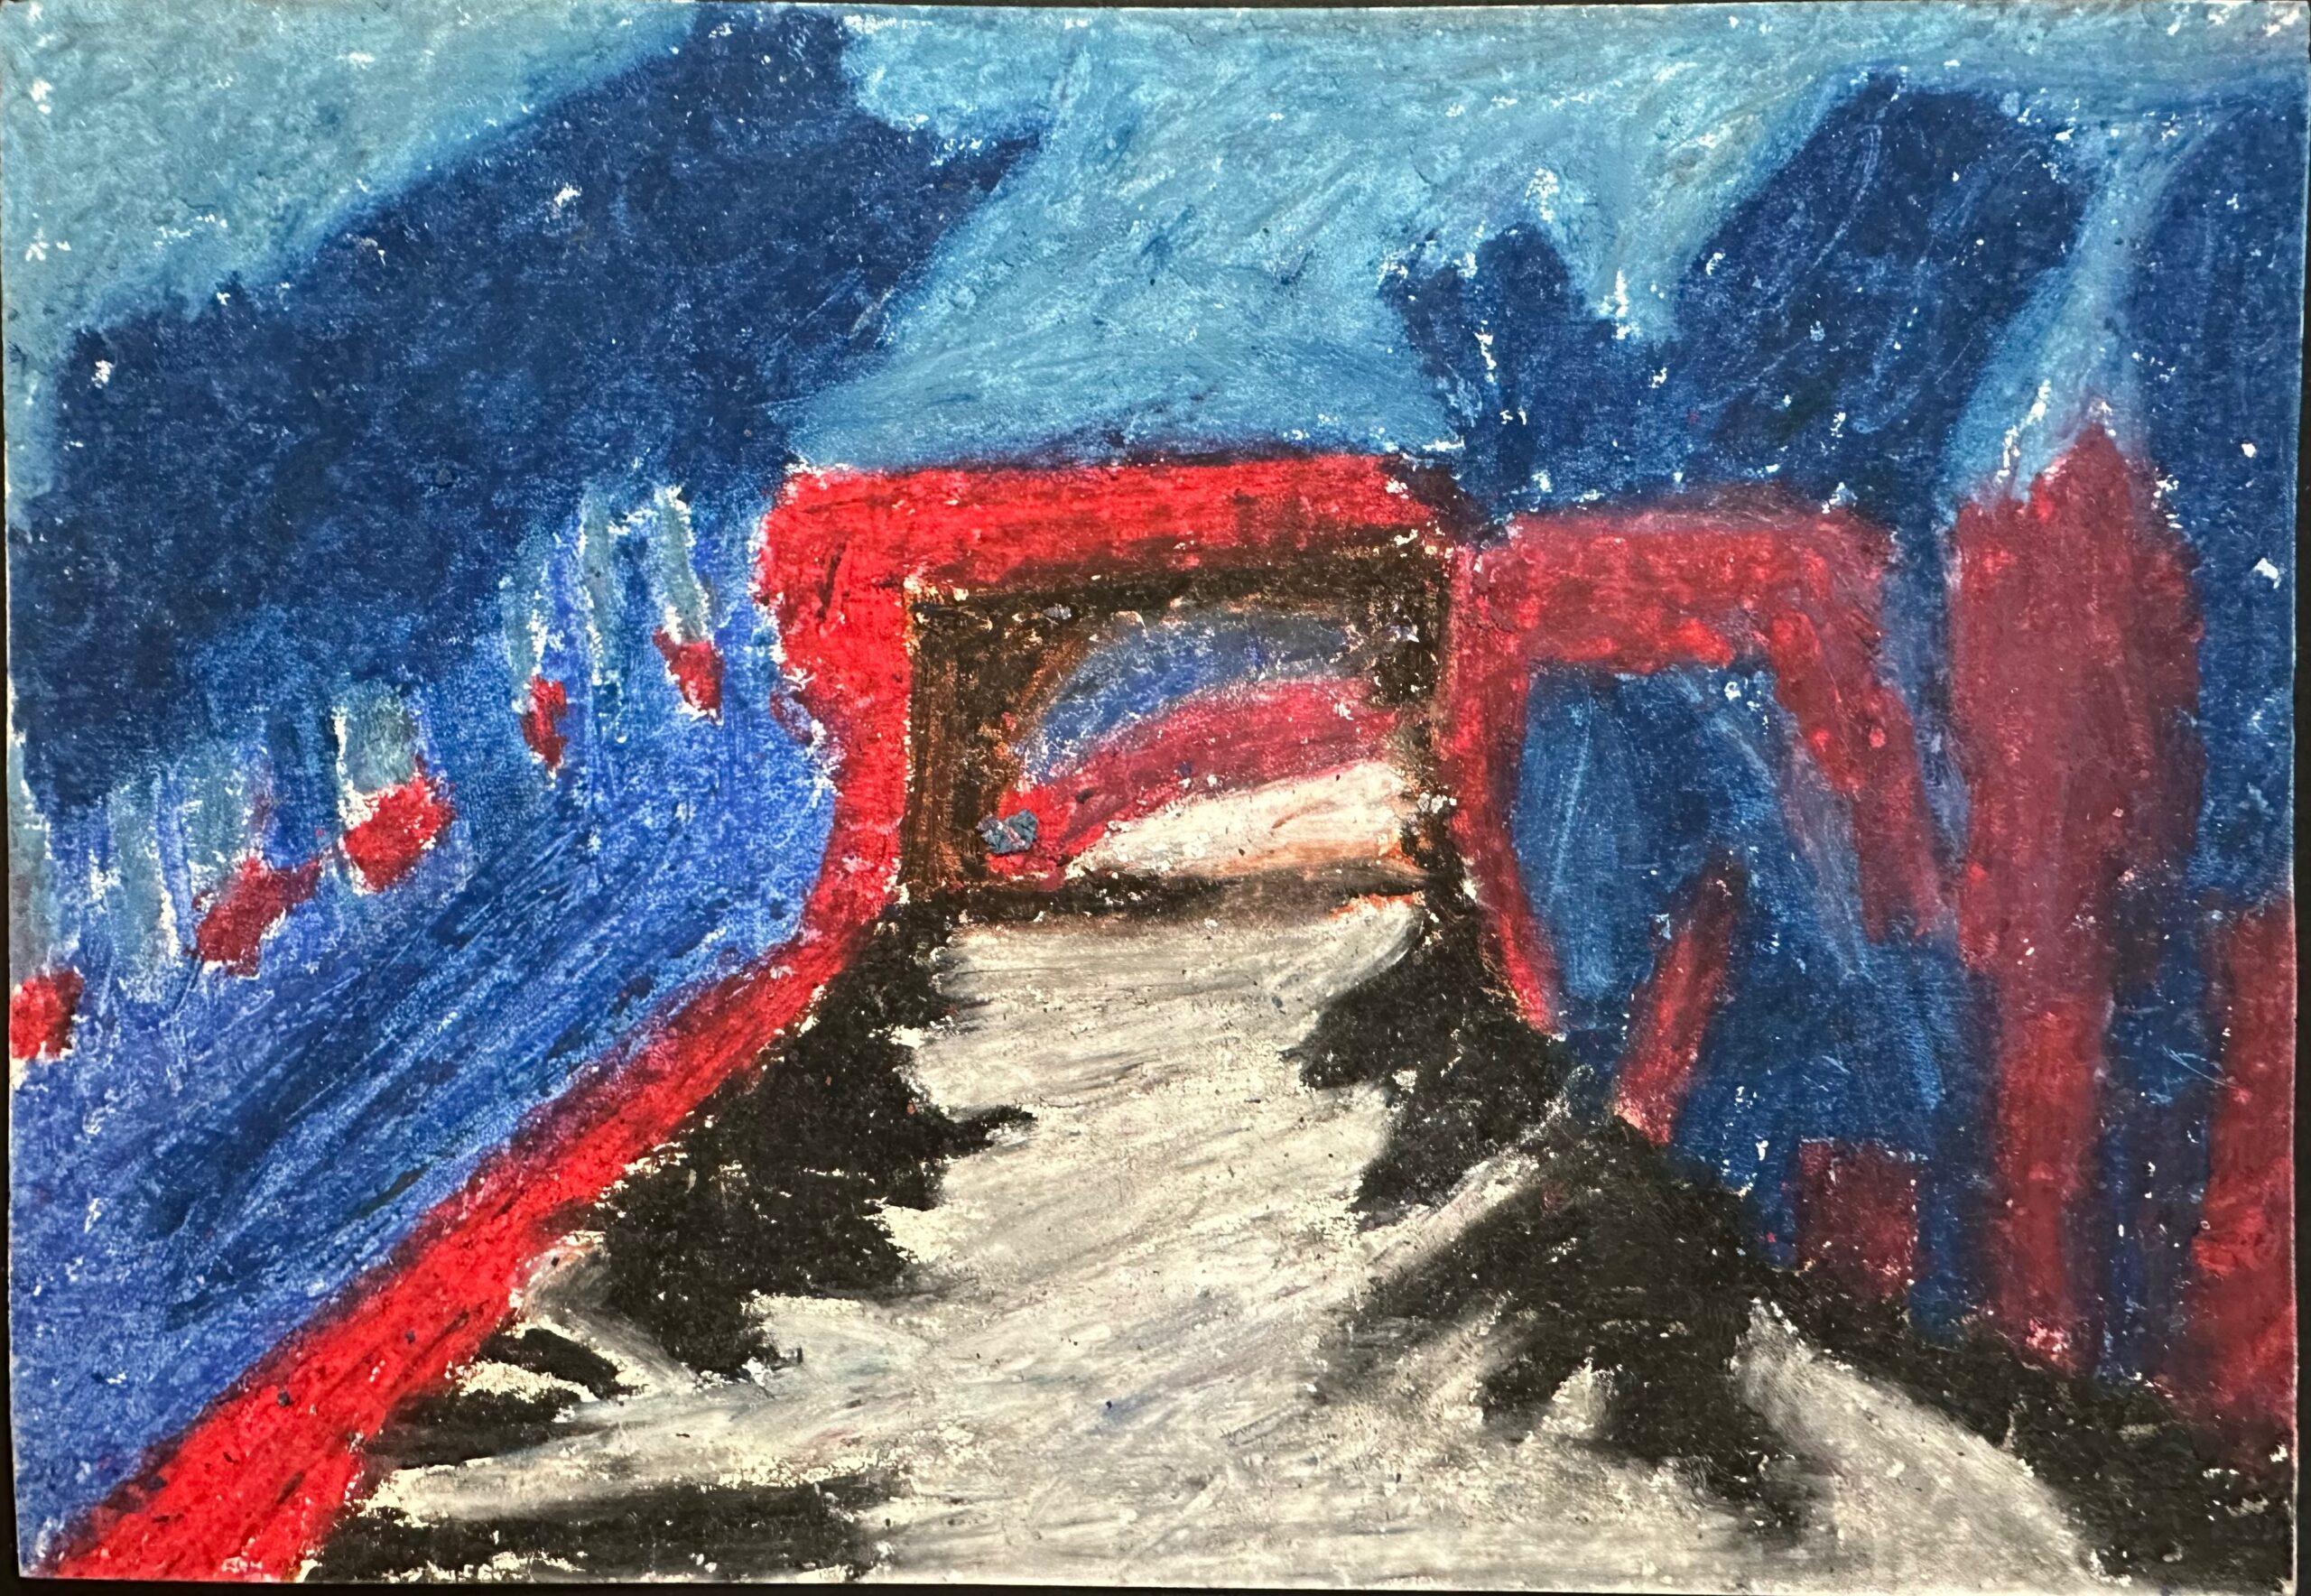 St Marks Park III blue and red bridge by Claudia Capri - Painting by Unknown